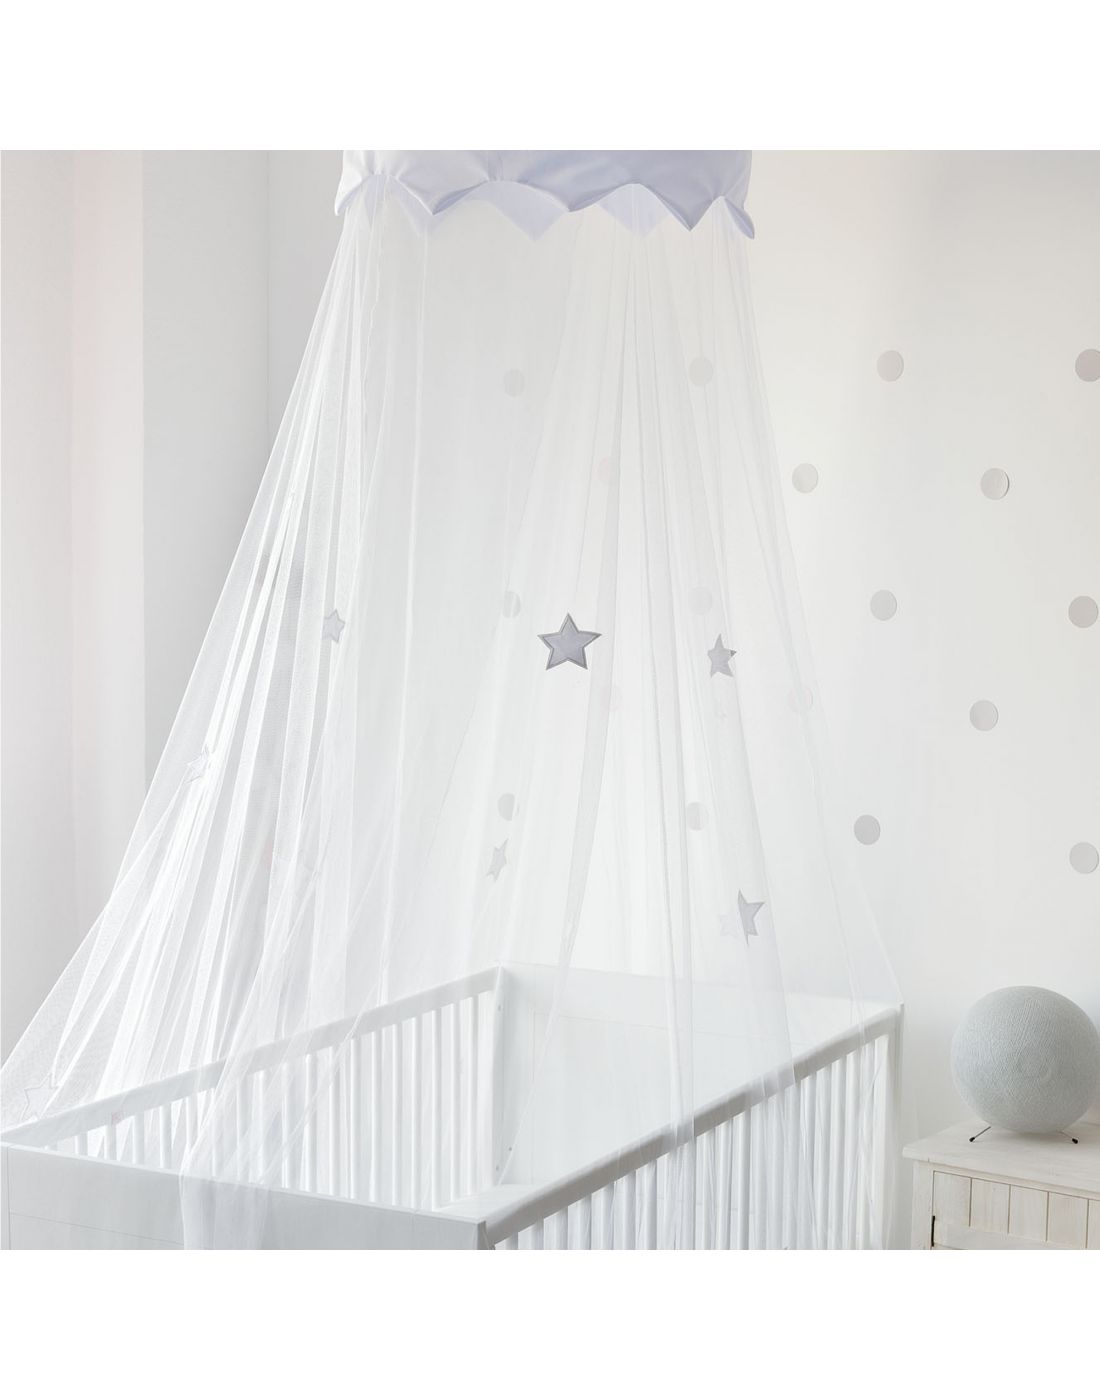 Tulin Ceiling Mosquito Netting With A Star